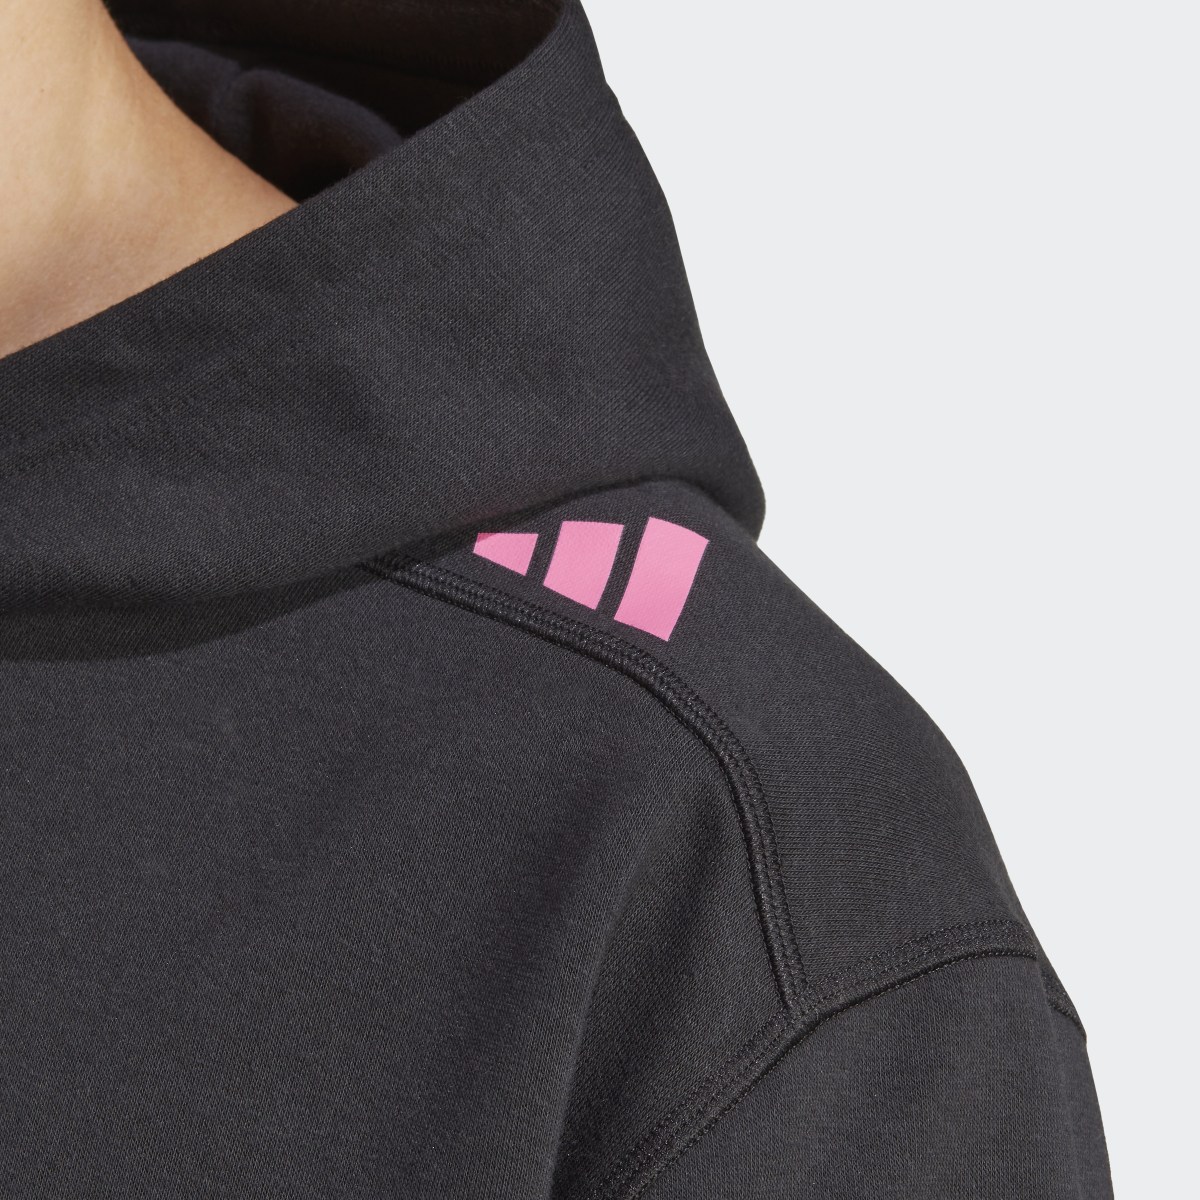 Adidas Sudadera con capucha HIIT Curated By Cody Rigsby. 6